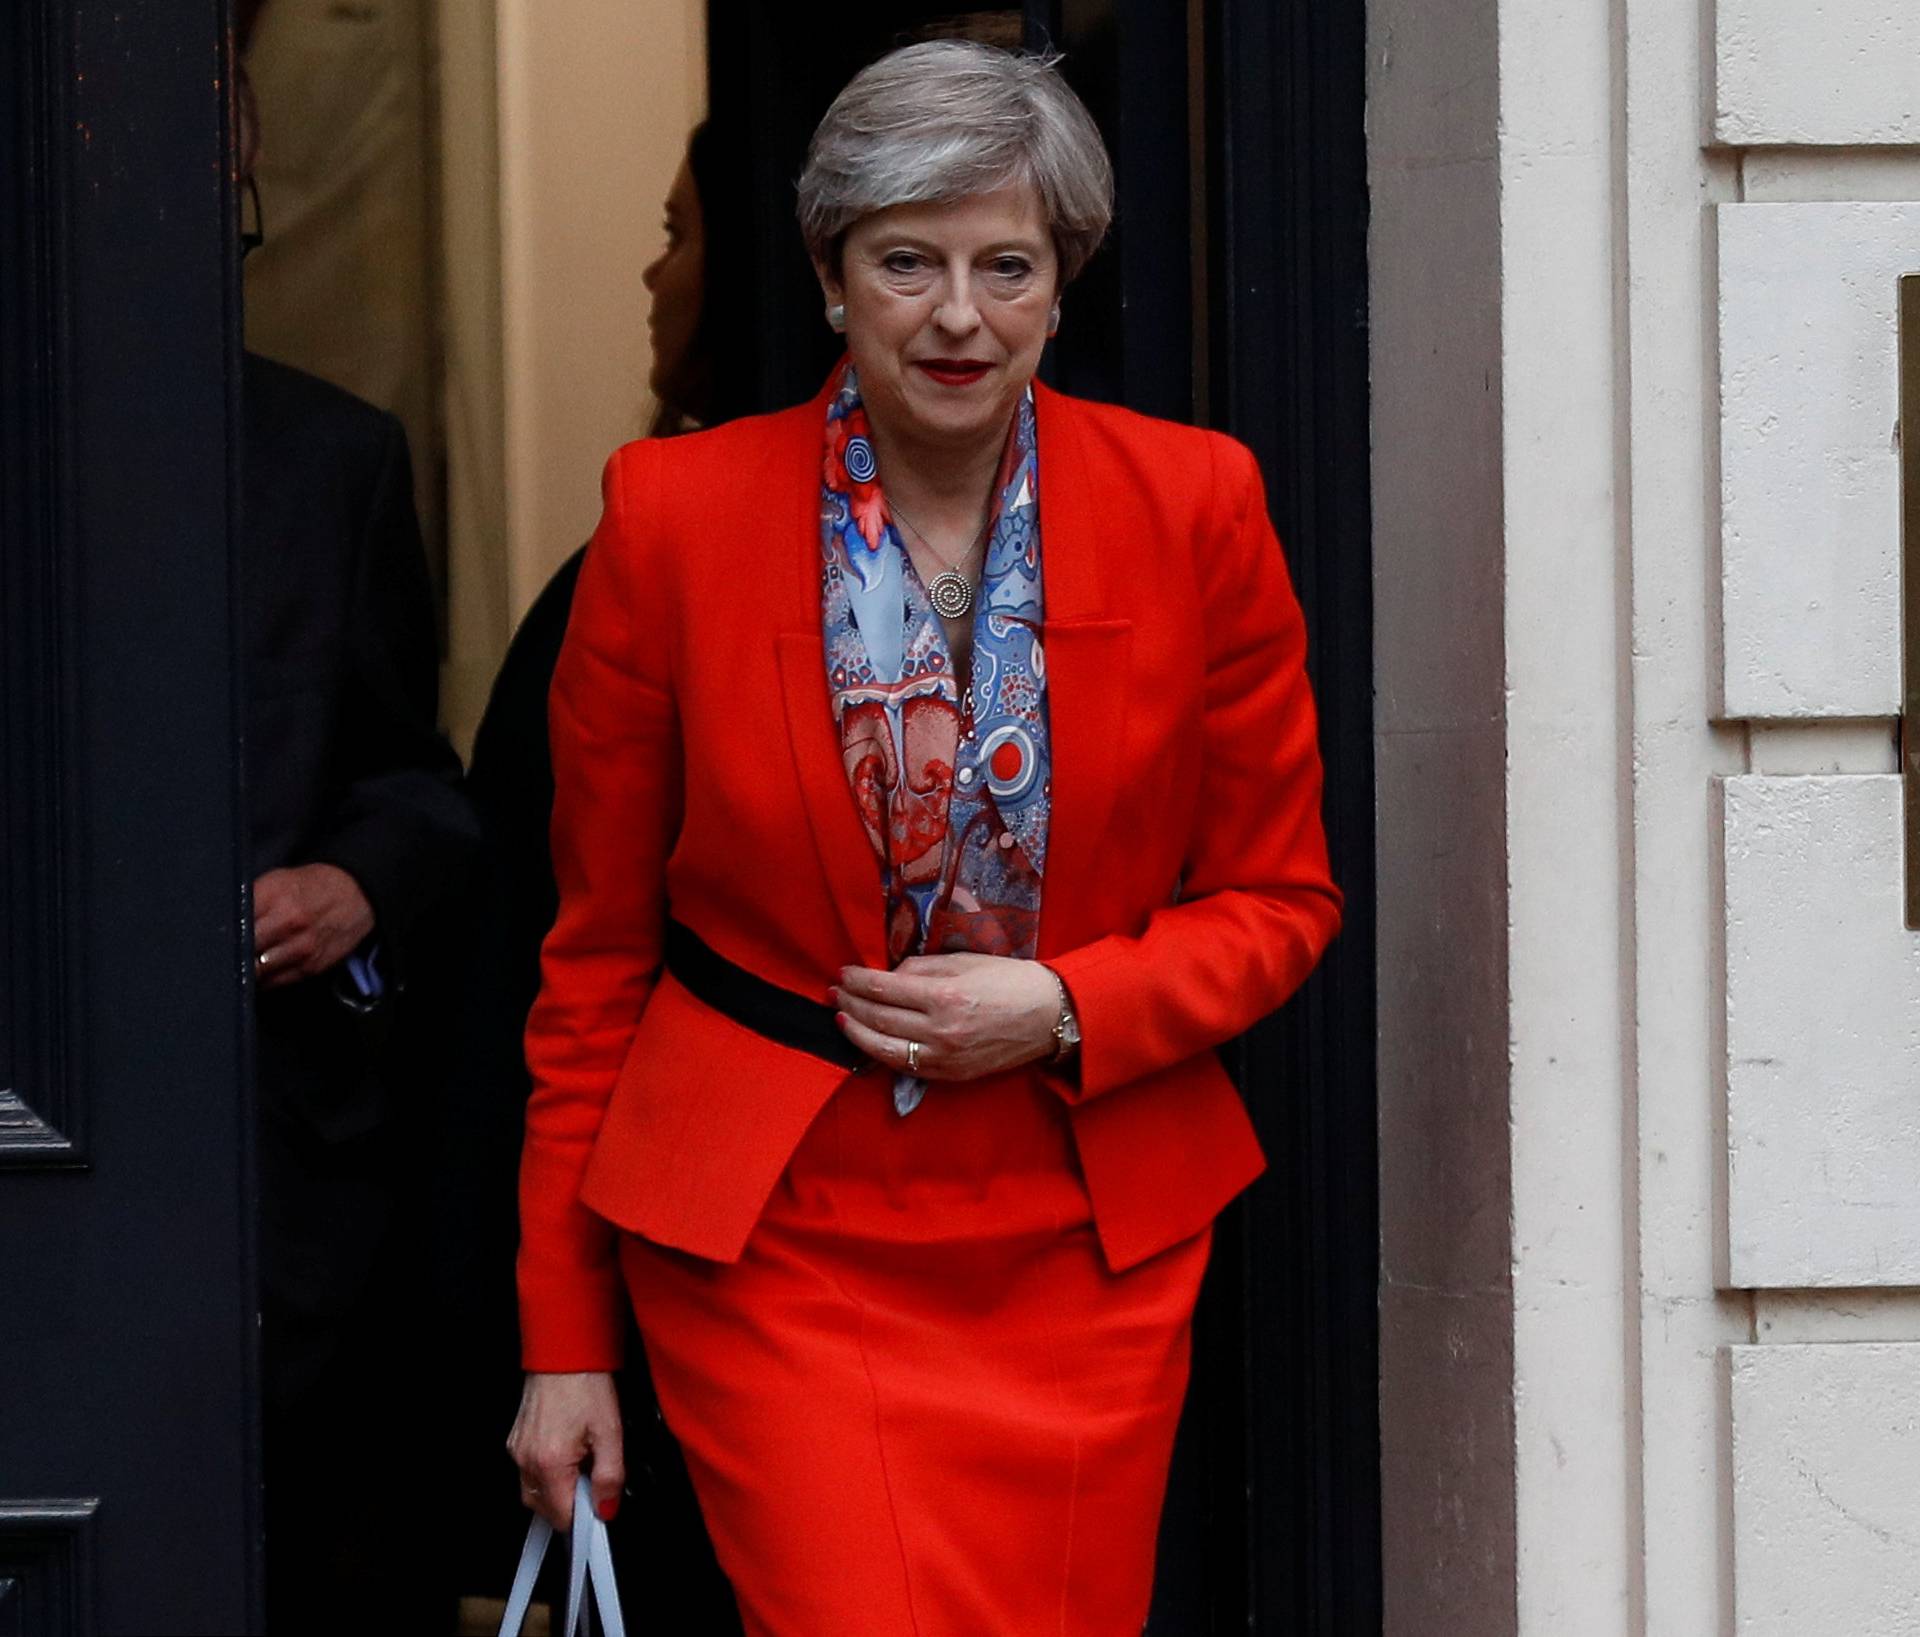 Britain's Prime Minister Theresa May leaves the Conservative Party's Headquarters after Britain's election in London